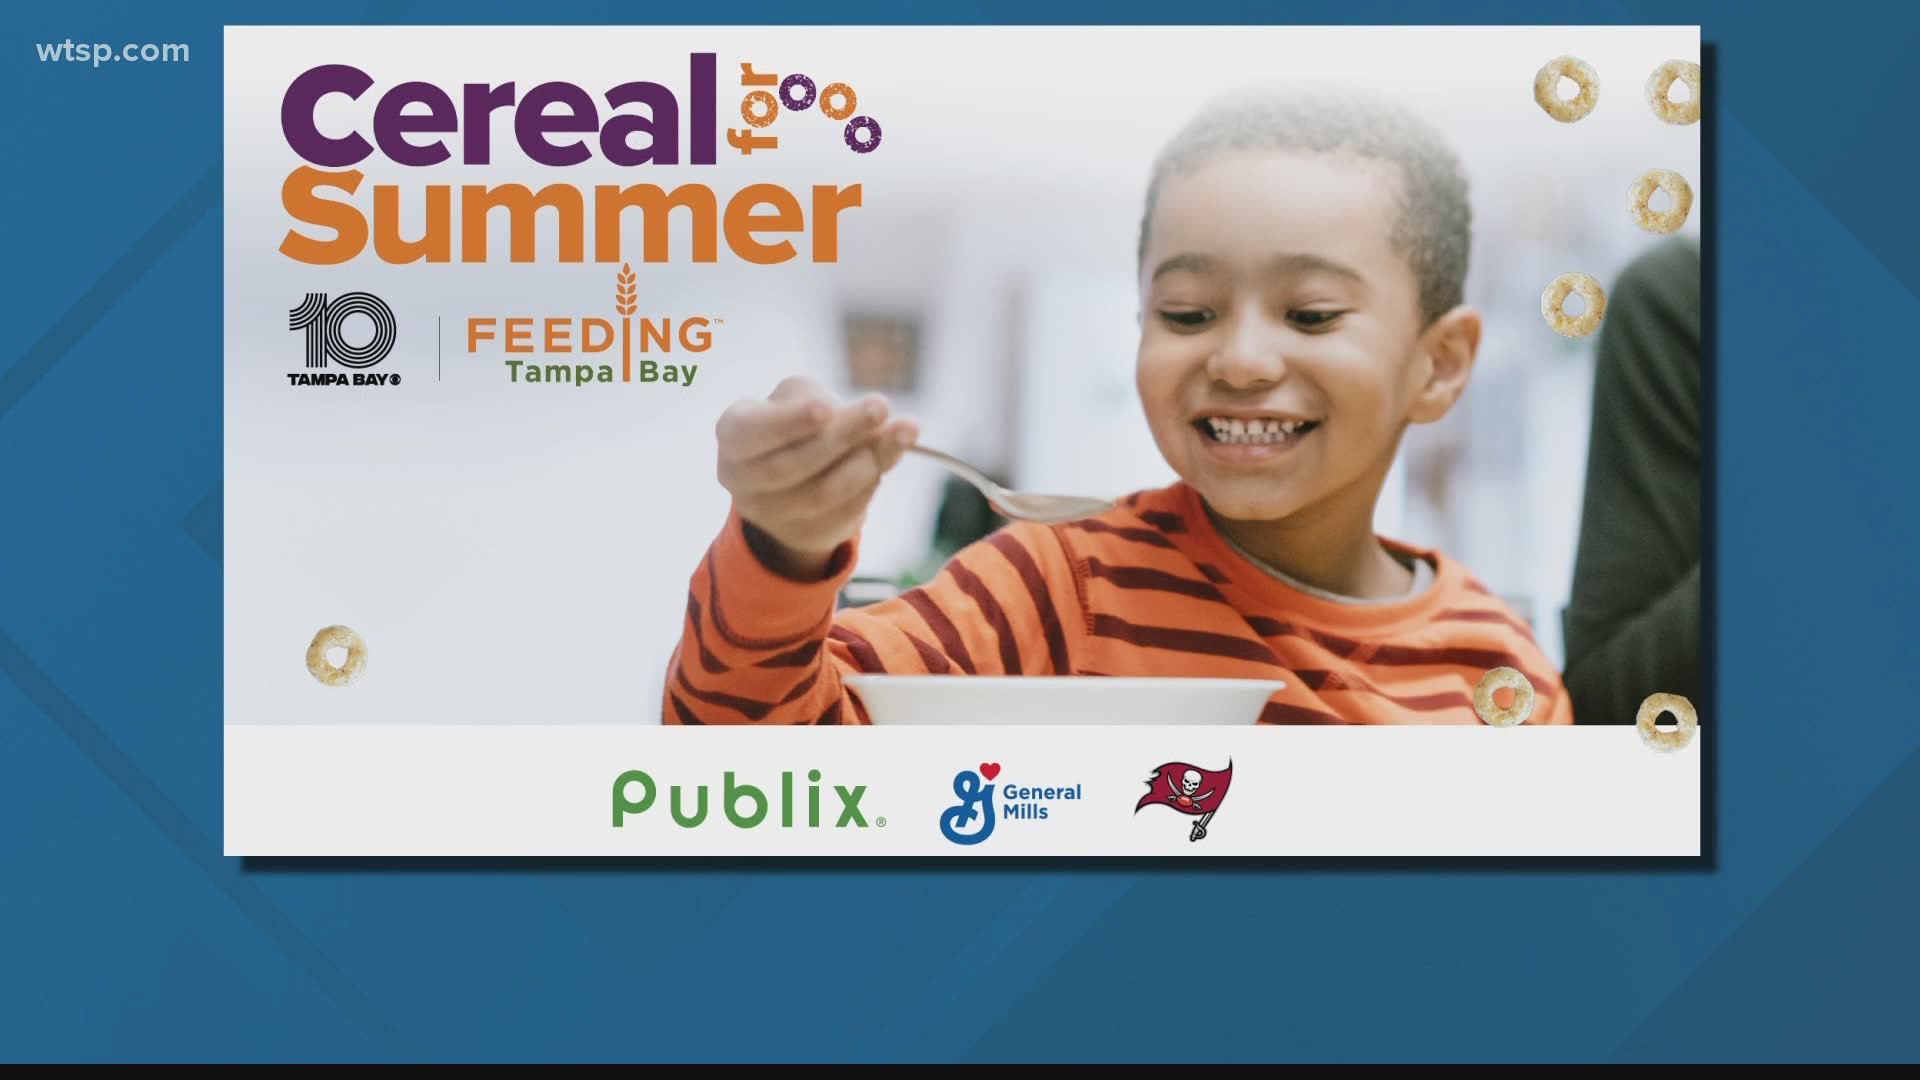 To donate, go to www.CerealForSummer.com. Your monetary donation to Feeding Tampa Bay will go to buy cereal at a greatly reduced cost—magnifying your effort.